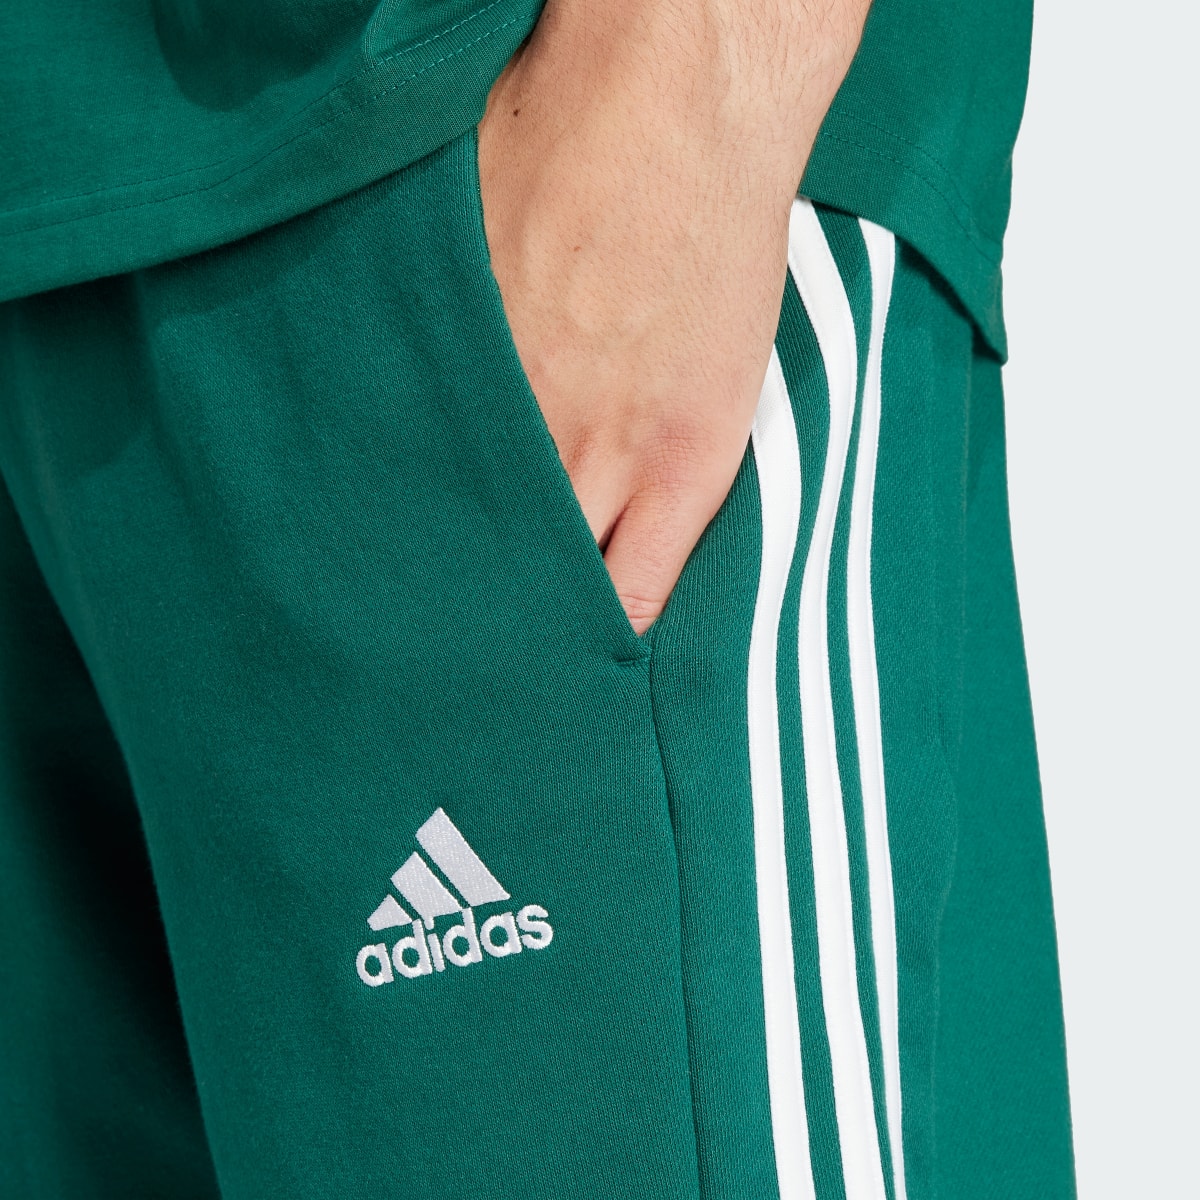 Adidas Essentials French Terry 3-Stripes Shorts. 5